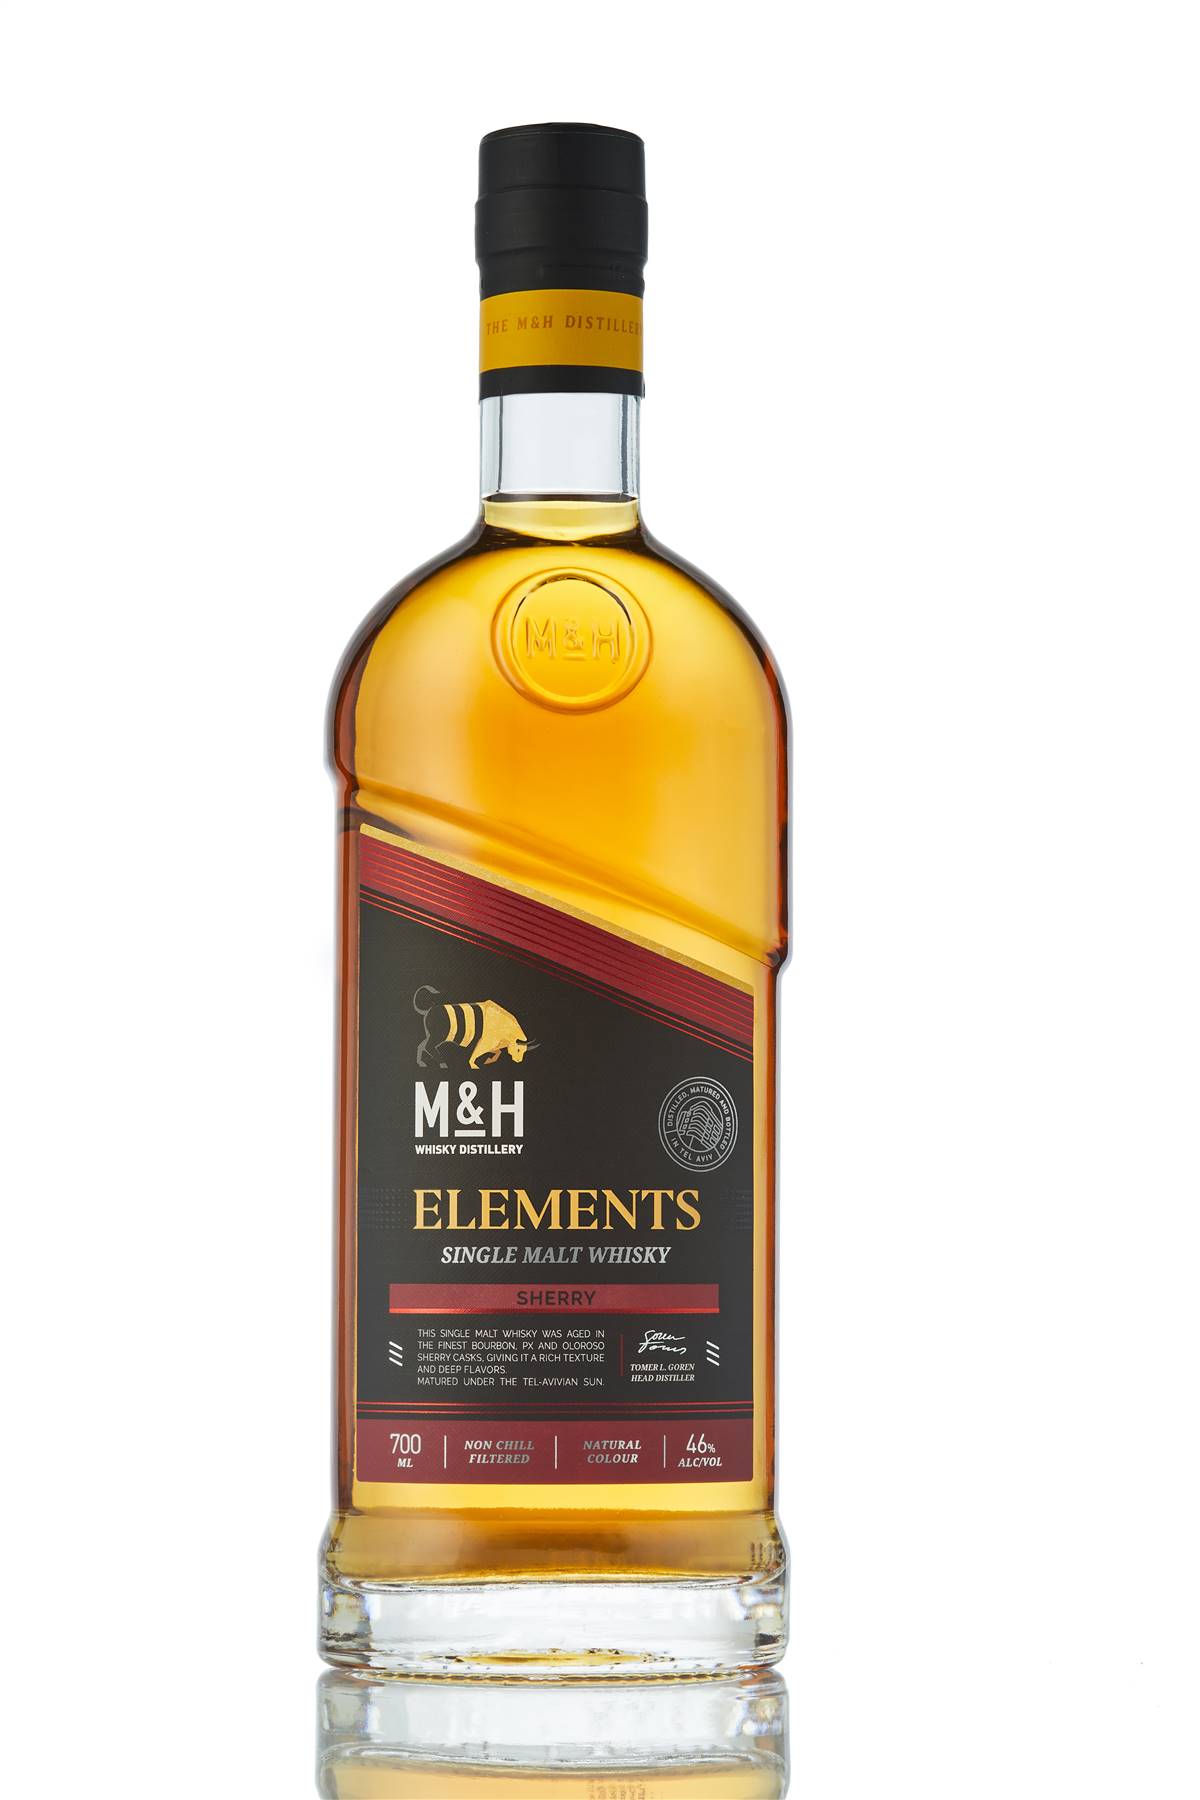 M&H Elements Sherry